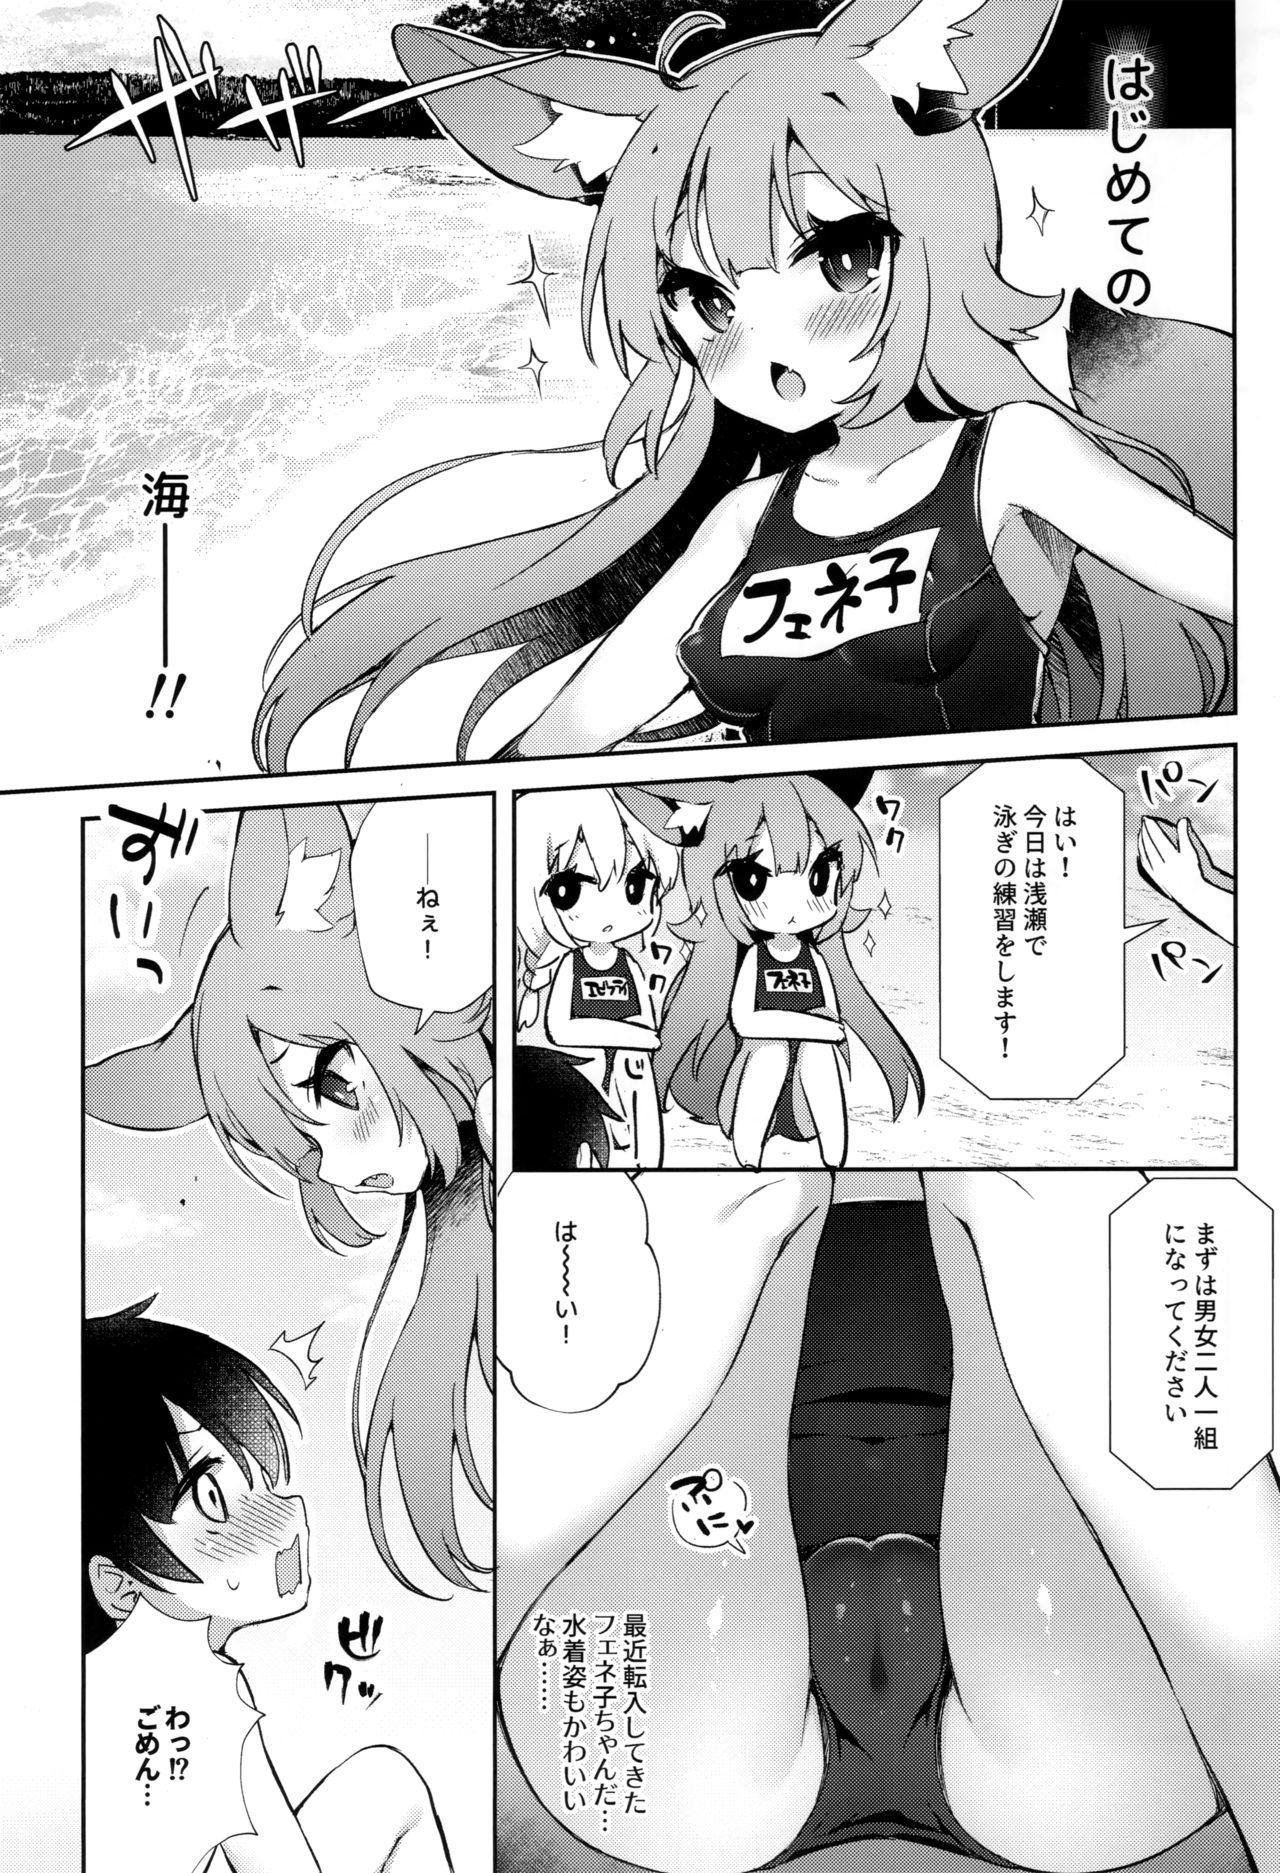 Gang Fennec Musume Summer! - Original 18yearsold - Page 5